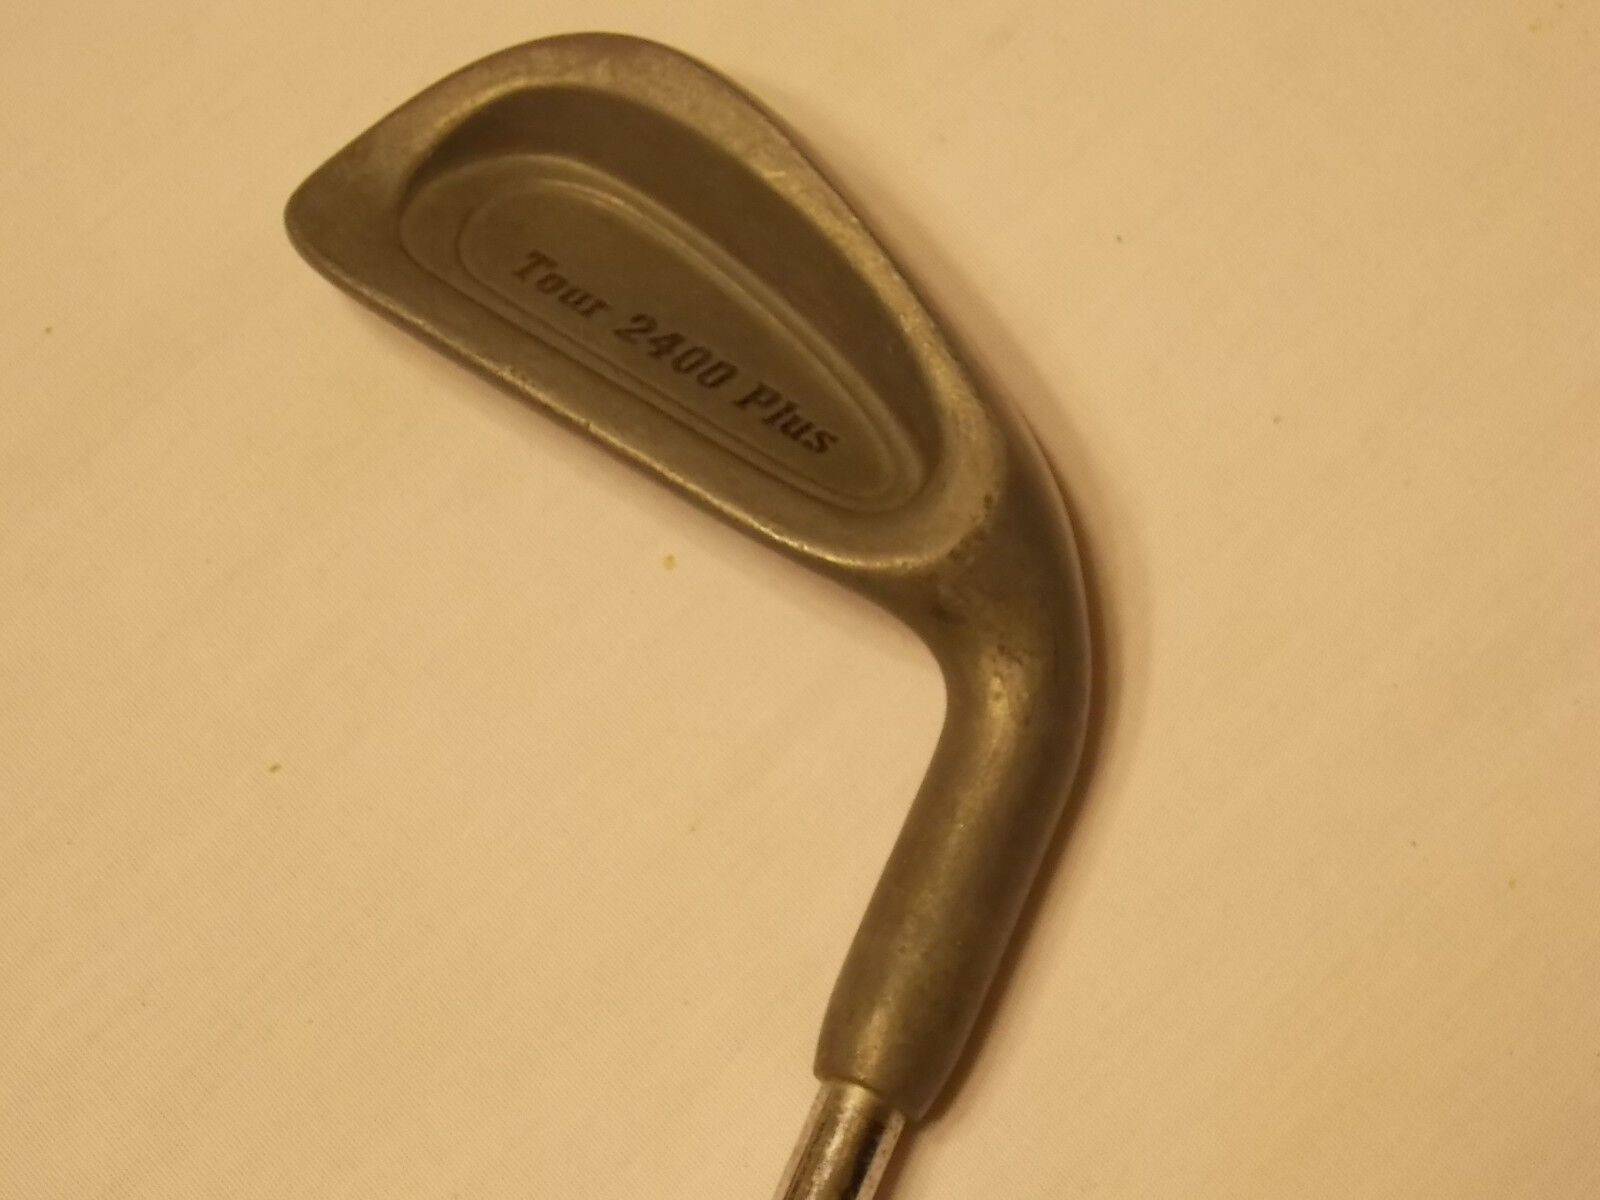 Dunlop Tour 2400 Plus 6 Iron with Power Point S flex Shaft and Lampkin Grip.